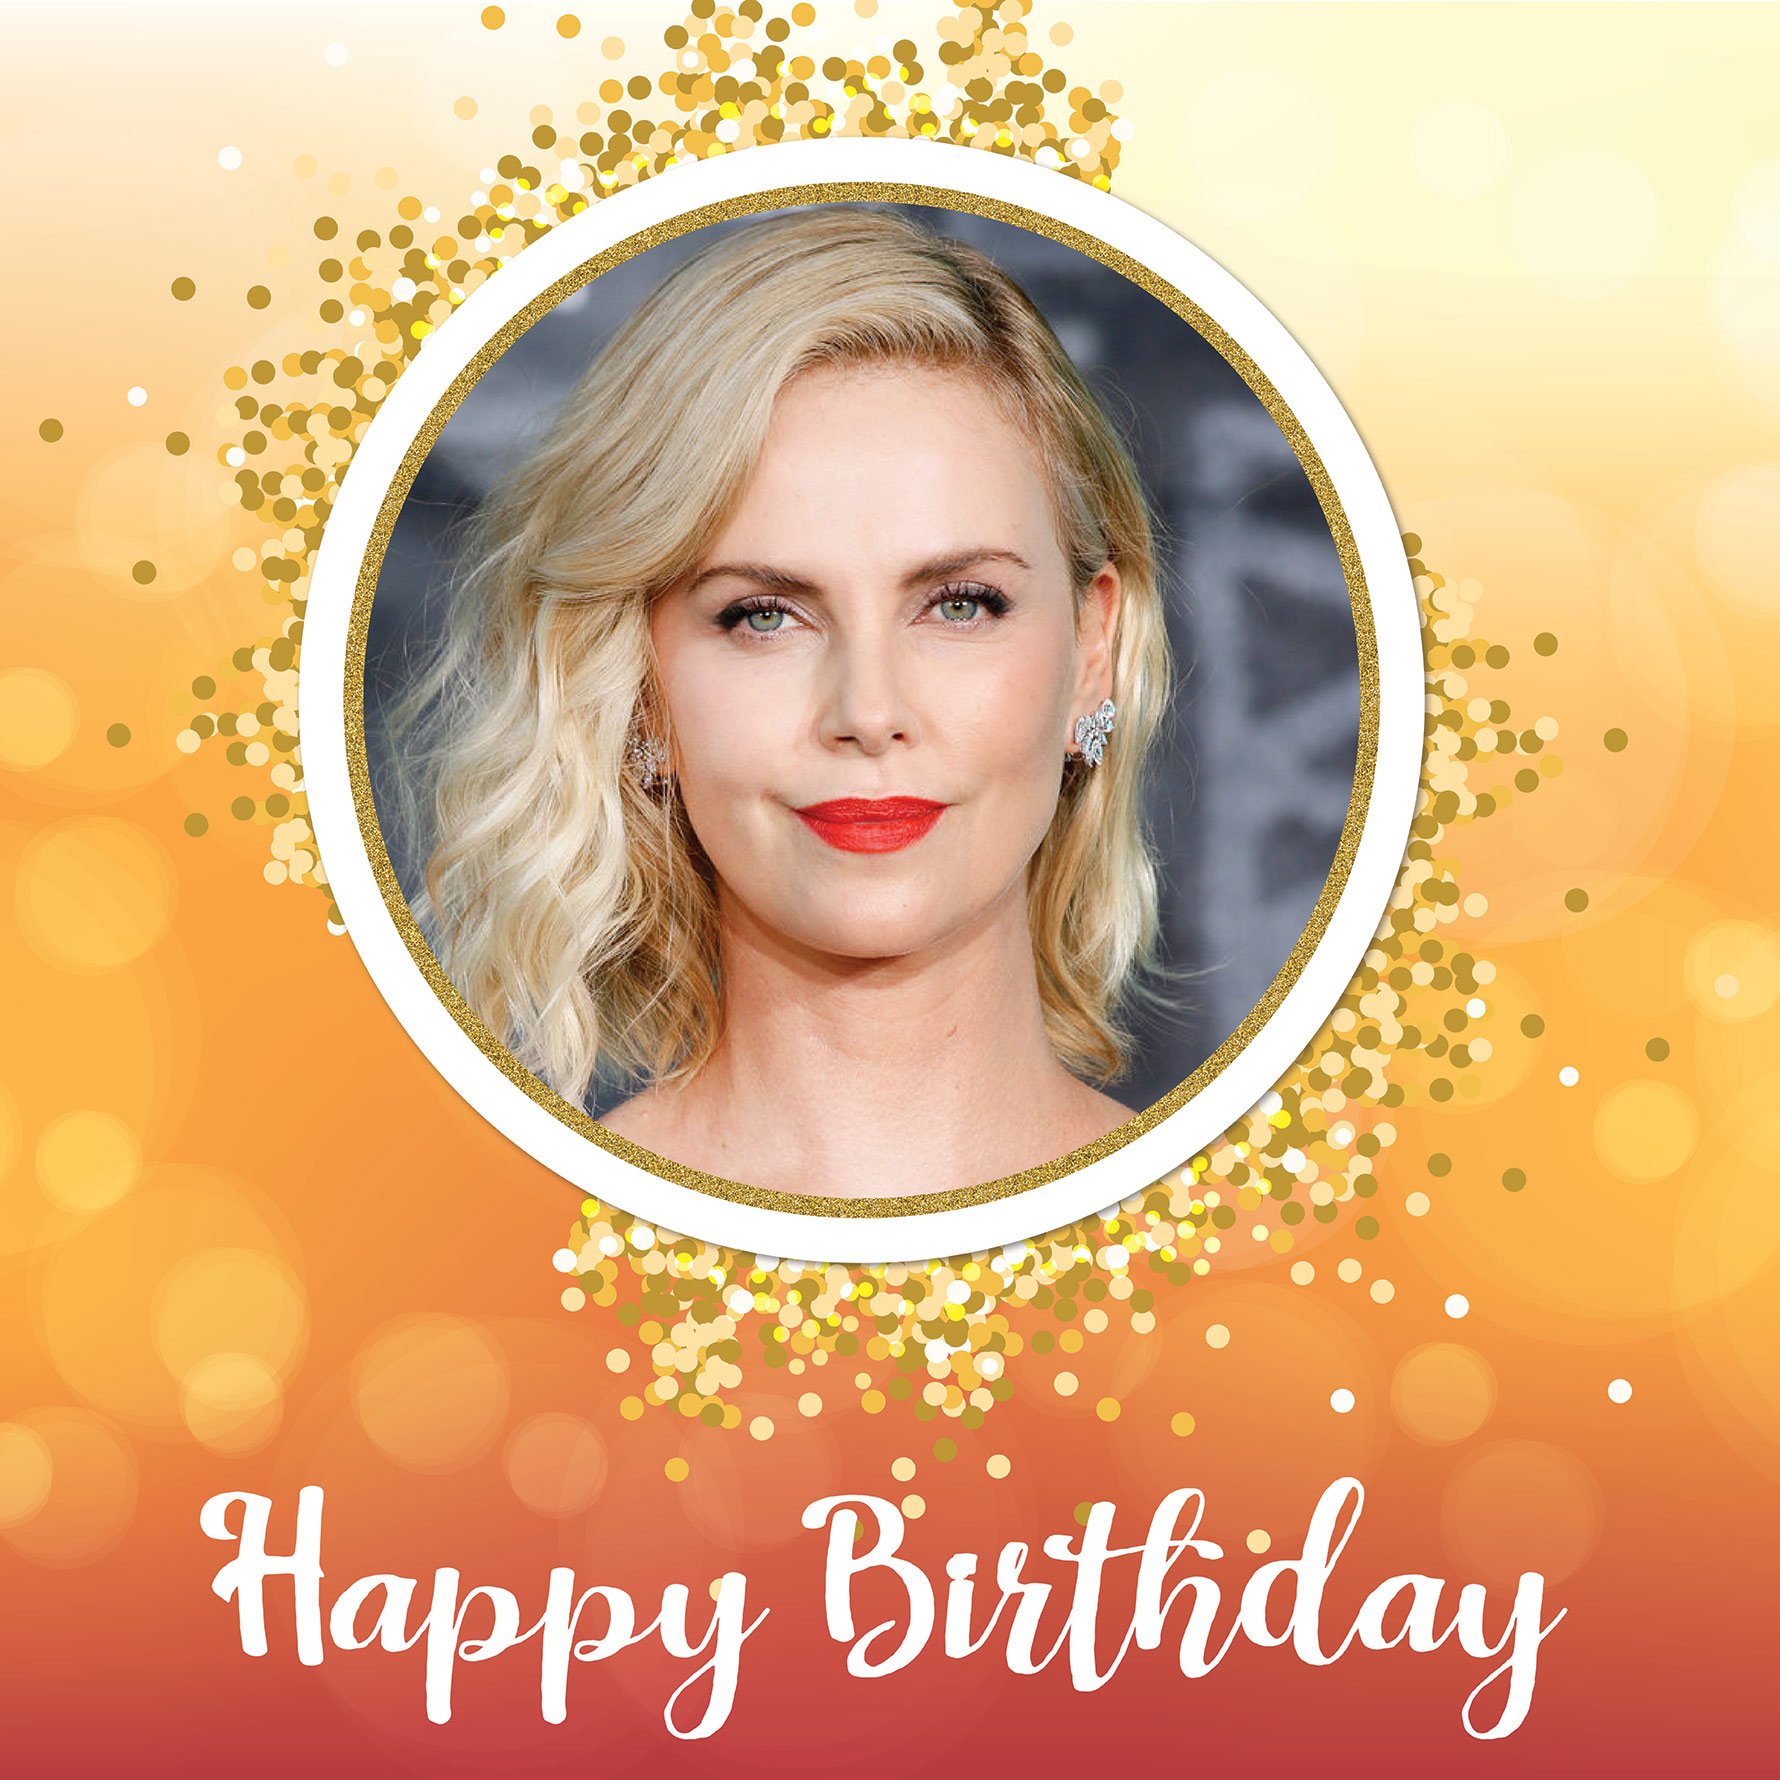 Happy birthday to our gorgeous star, Charlize Theron! 